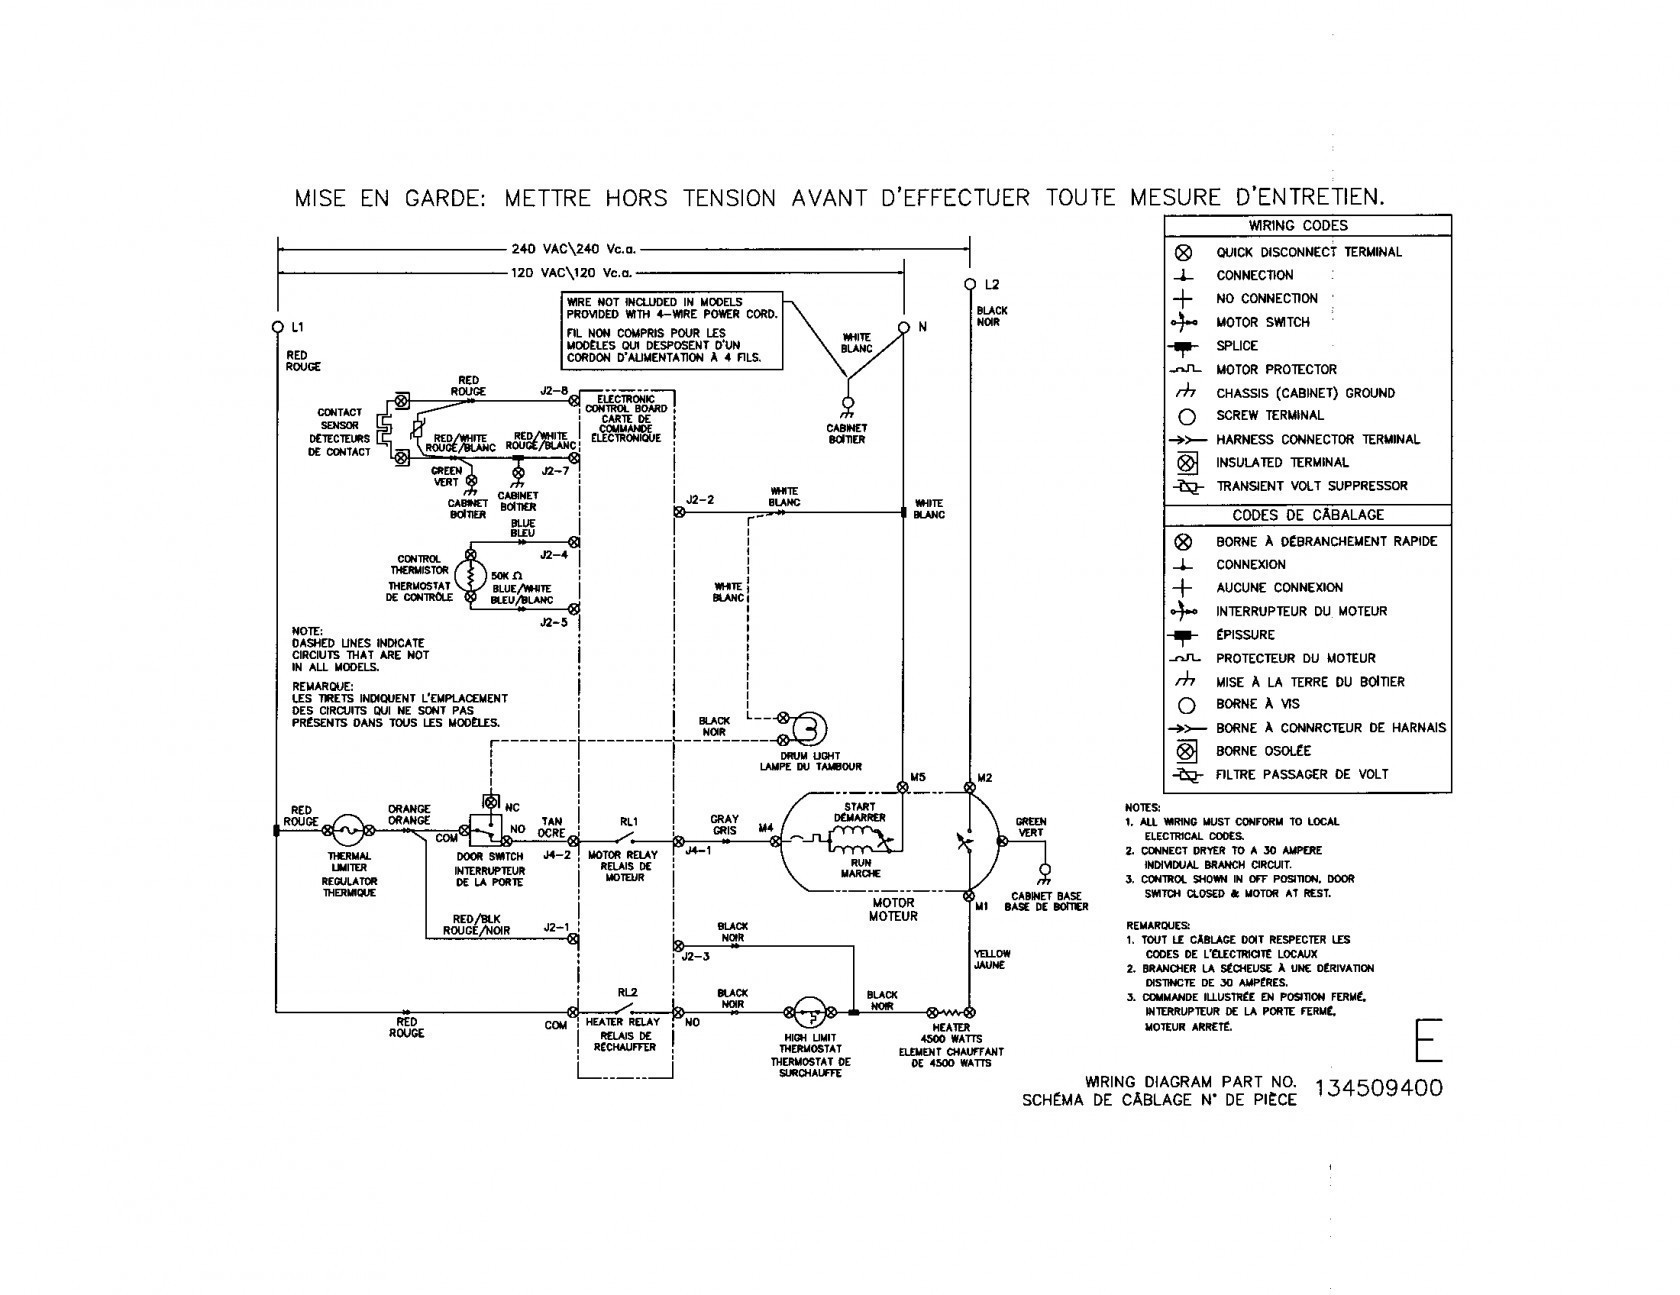 Wiring Diagram For Kenmore Dryer Example Kenmore Electric Dryer Wiring Diagram Natebird